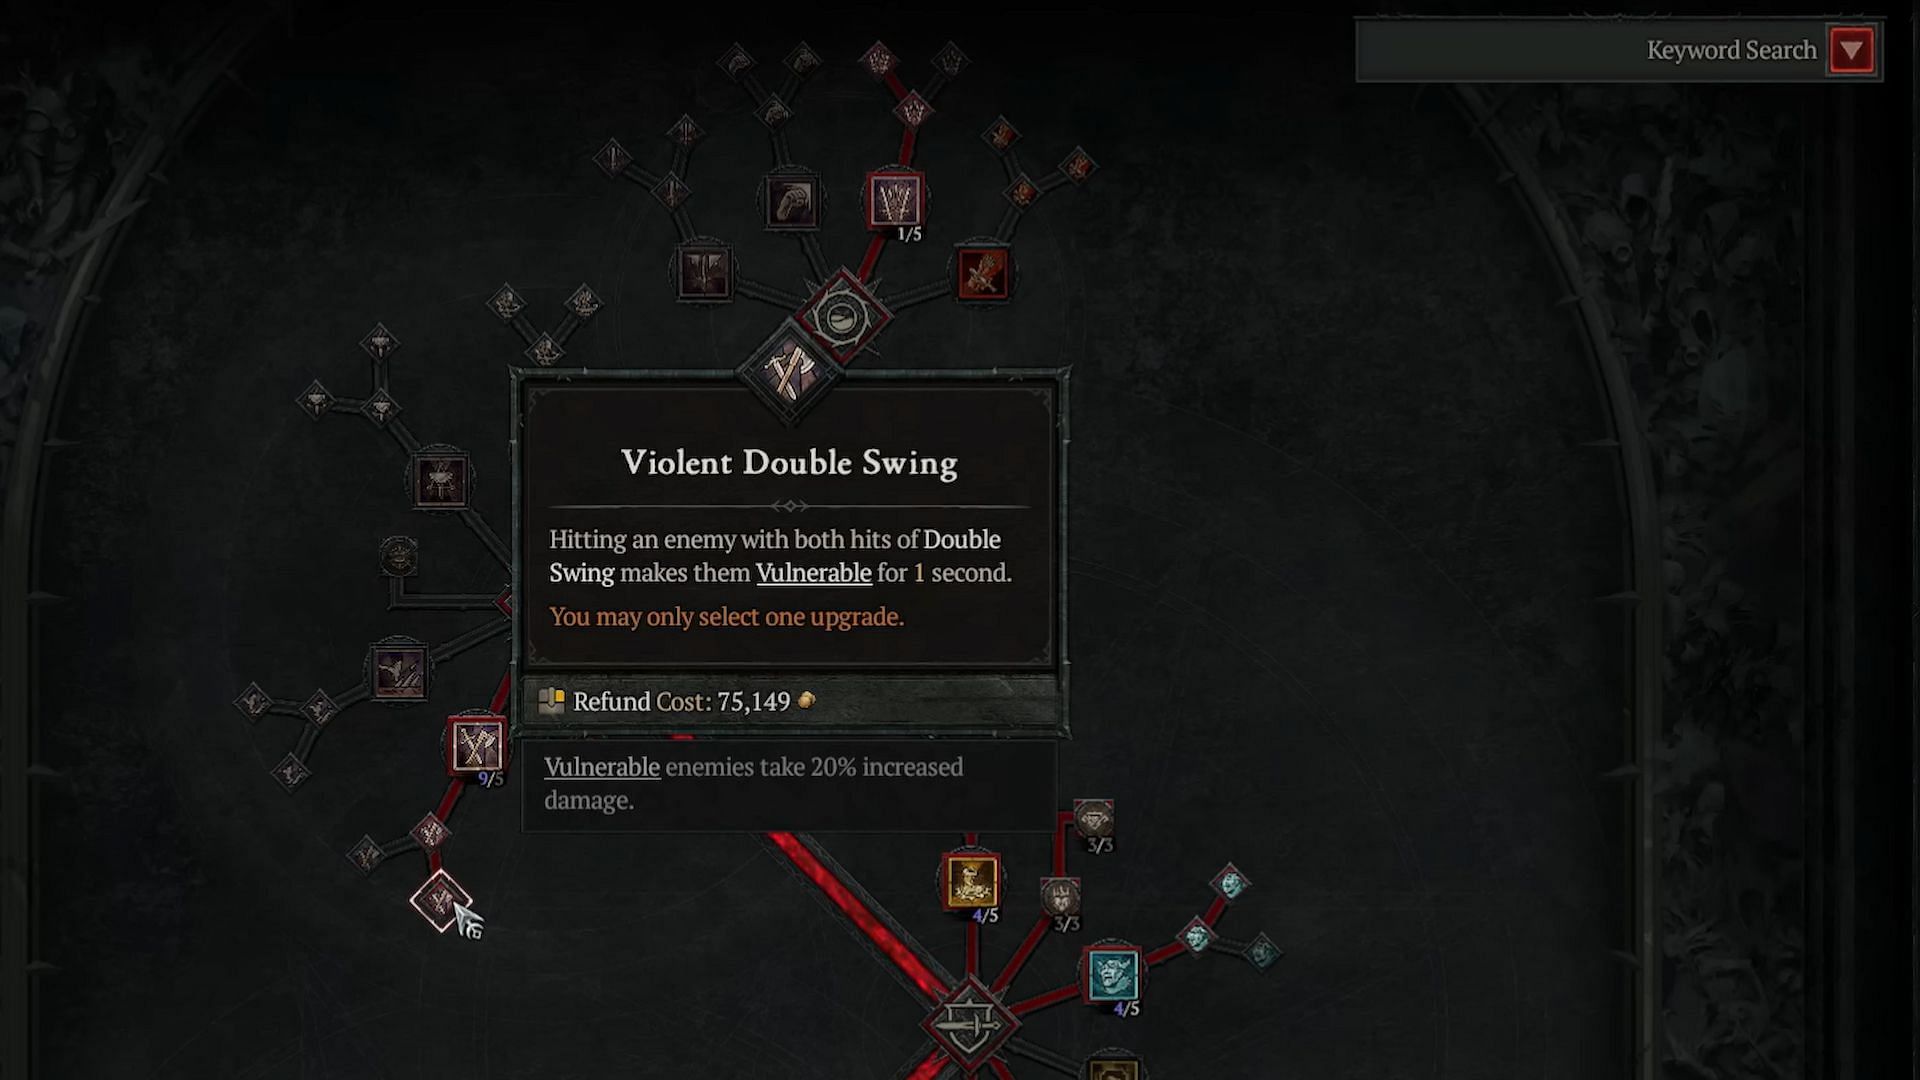 You must opt for Violent Double Swing for this build (Image via Diablo 4)